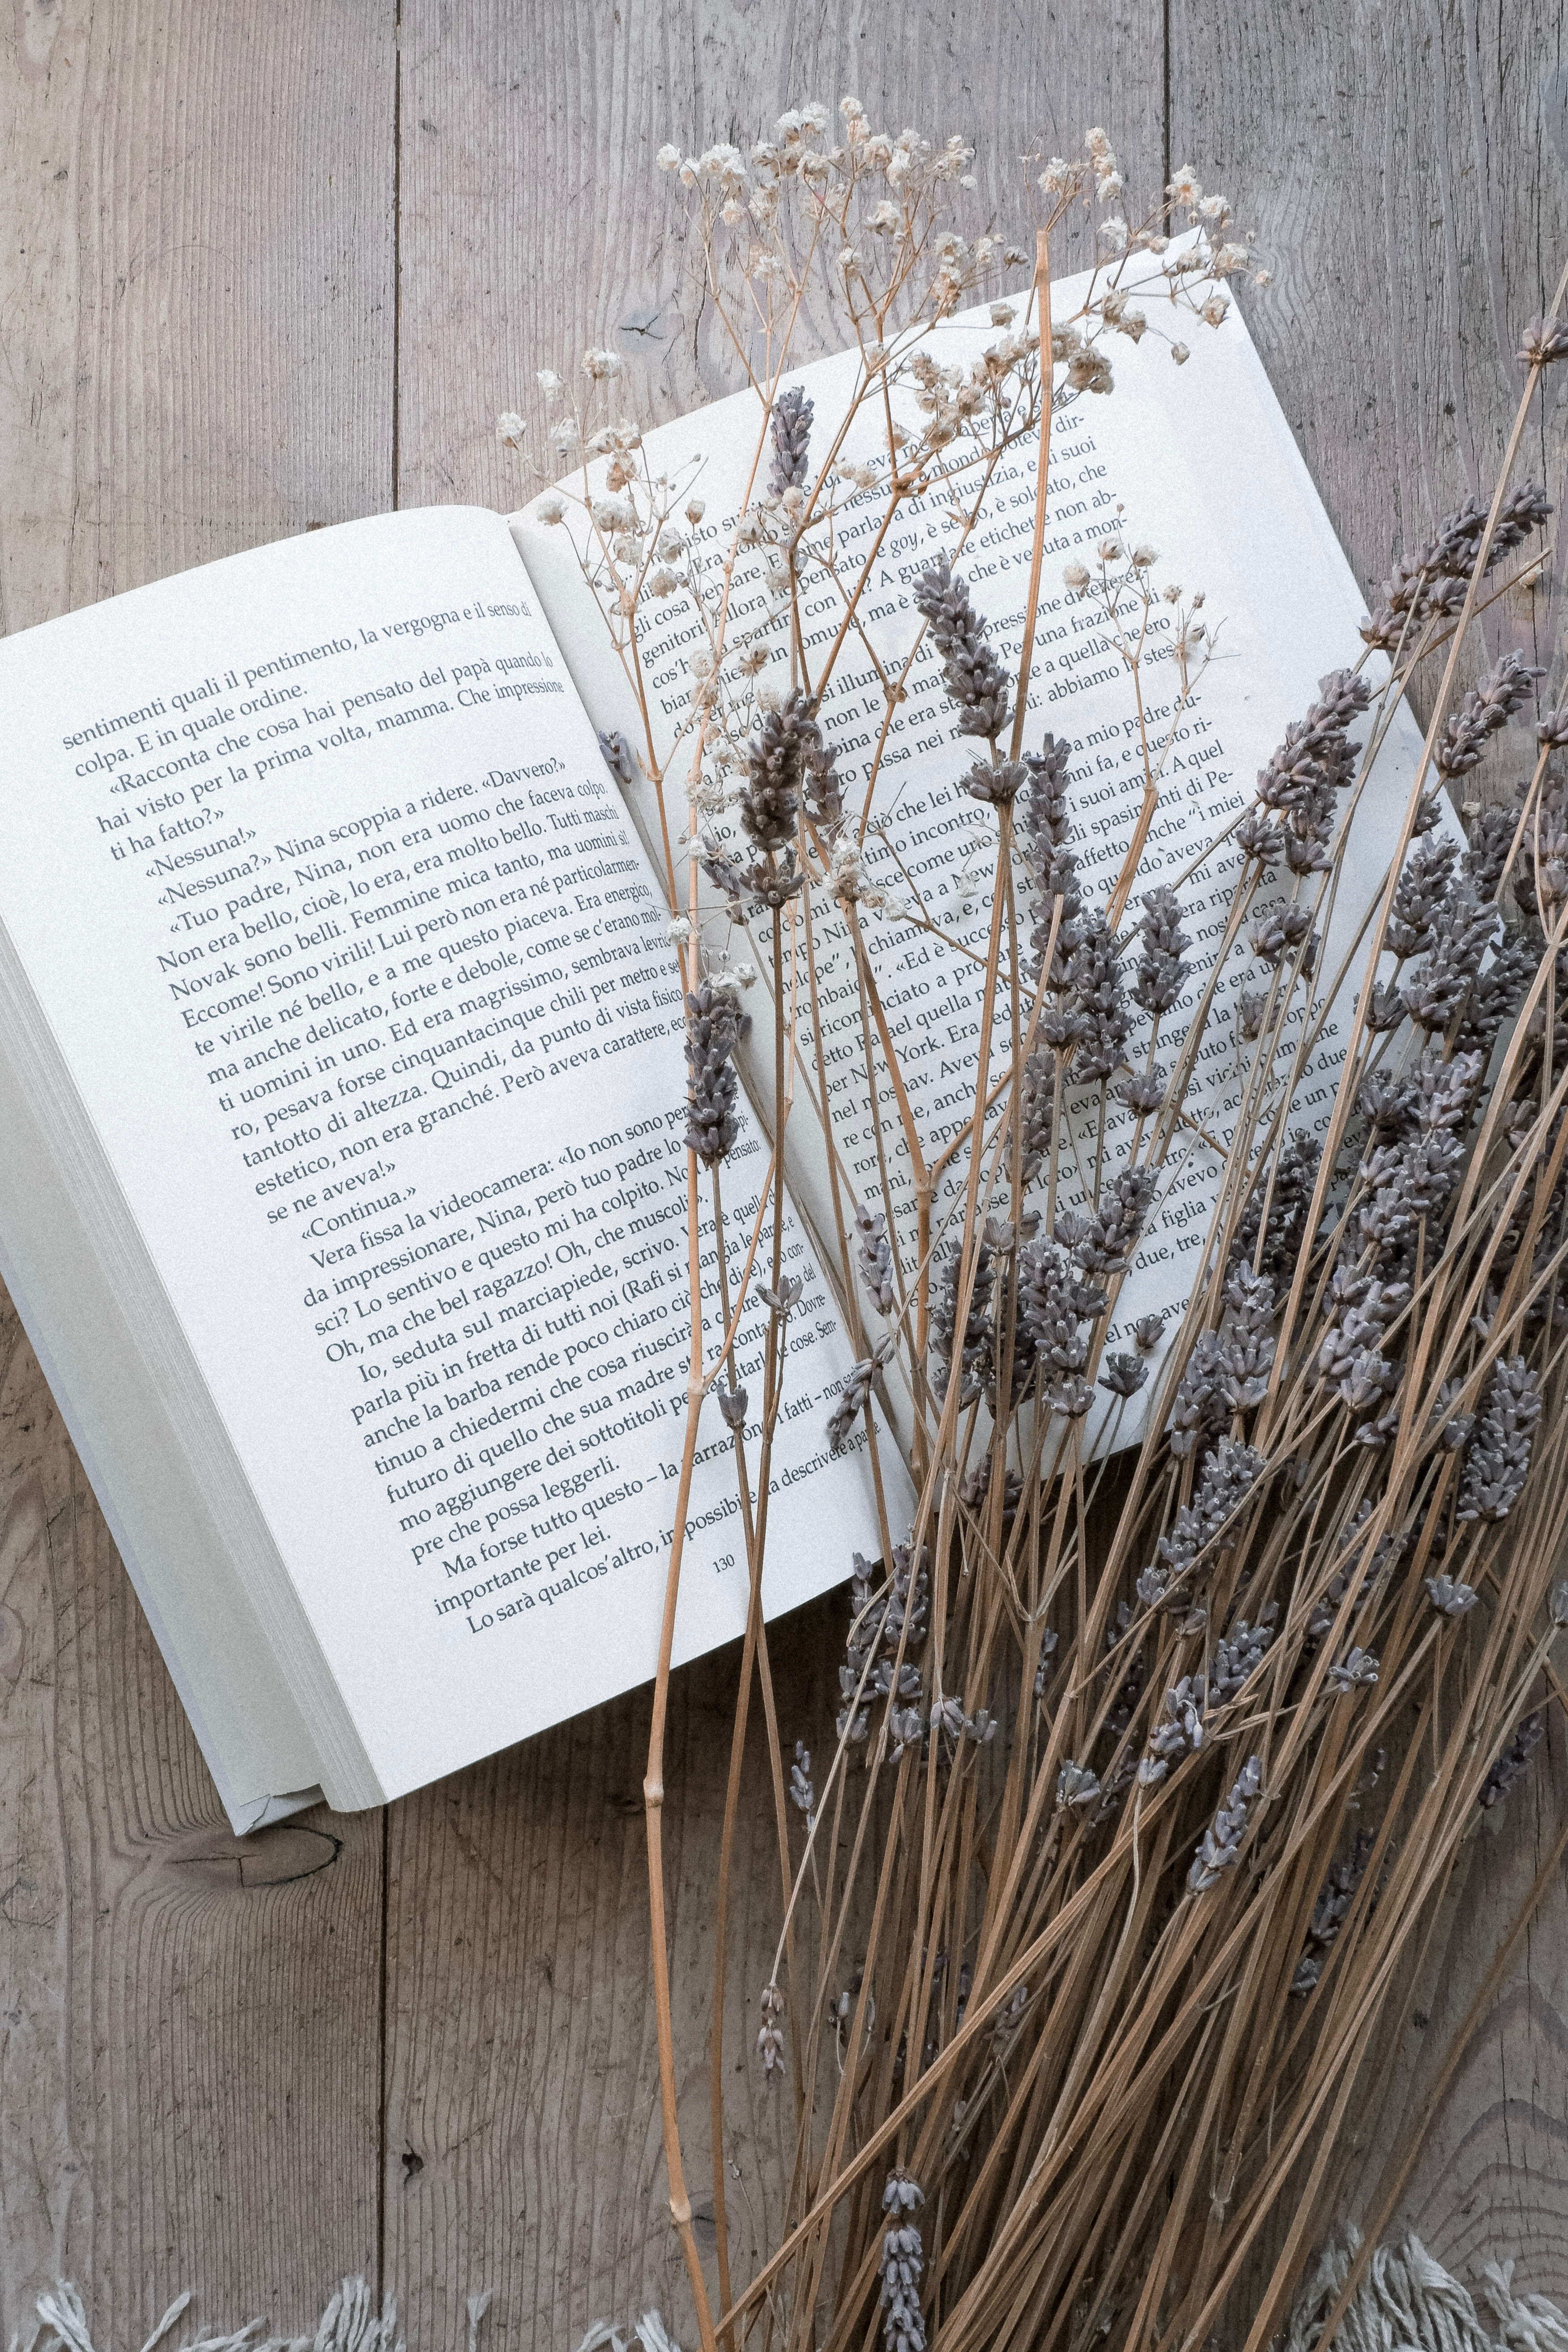 book, wood, miscellanea, flowers, miscellaneous, wooden, dried flowers, dryflower